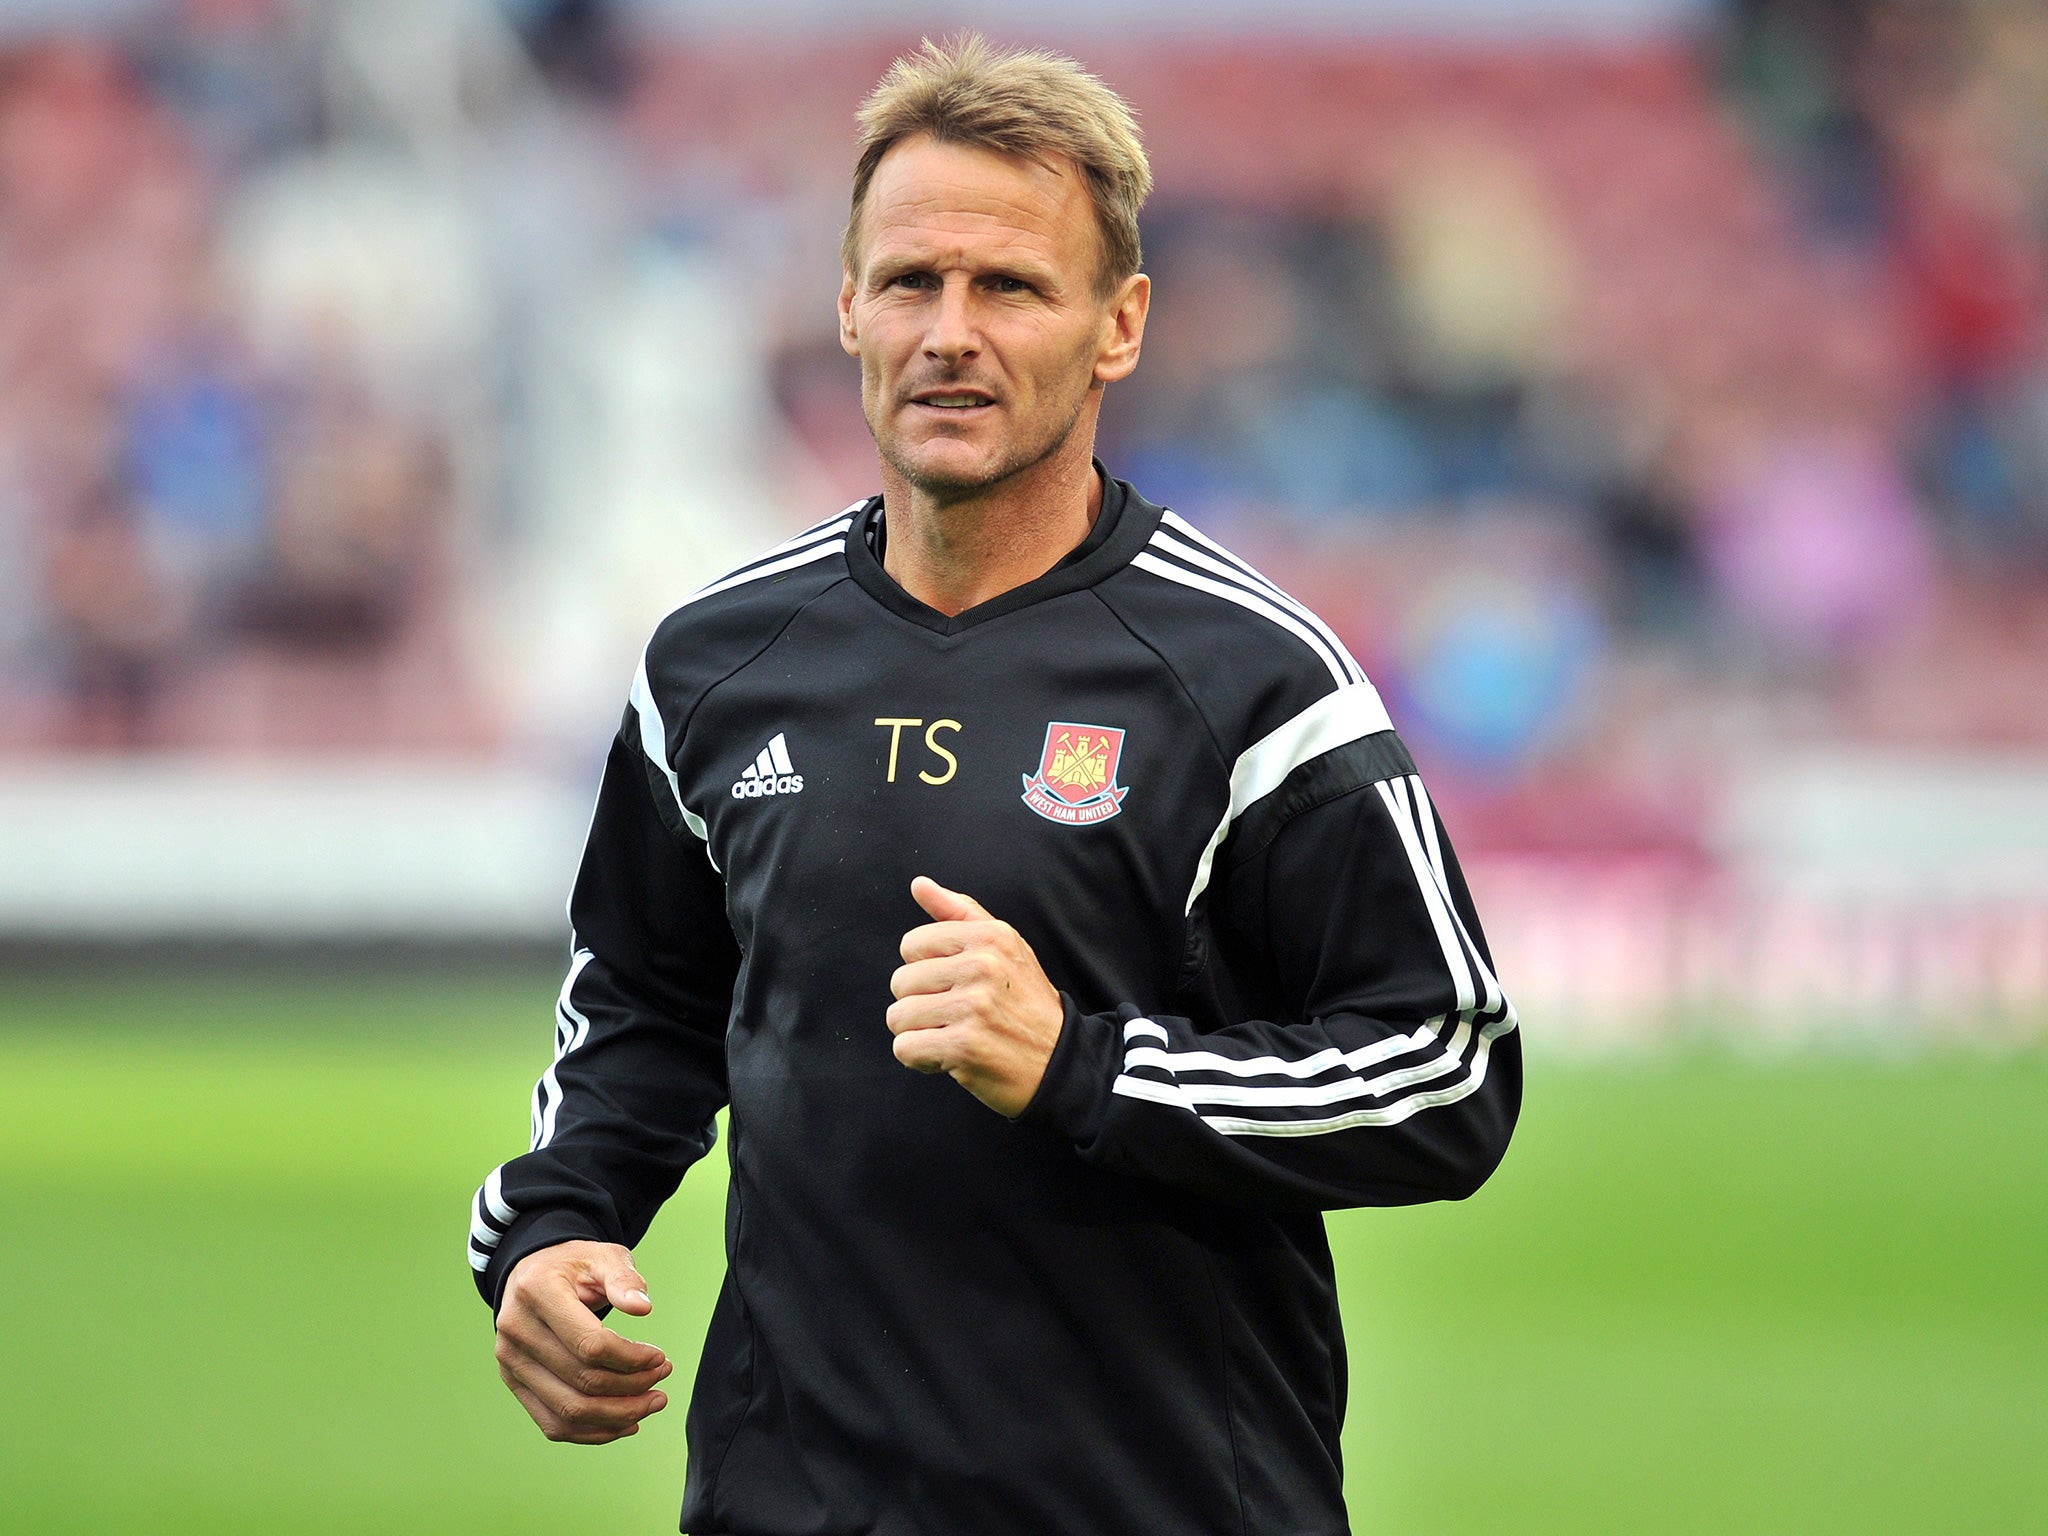 Sheringham has left his role as attacking coach at West Ham to join Stevenage